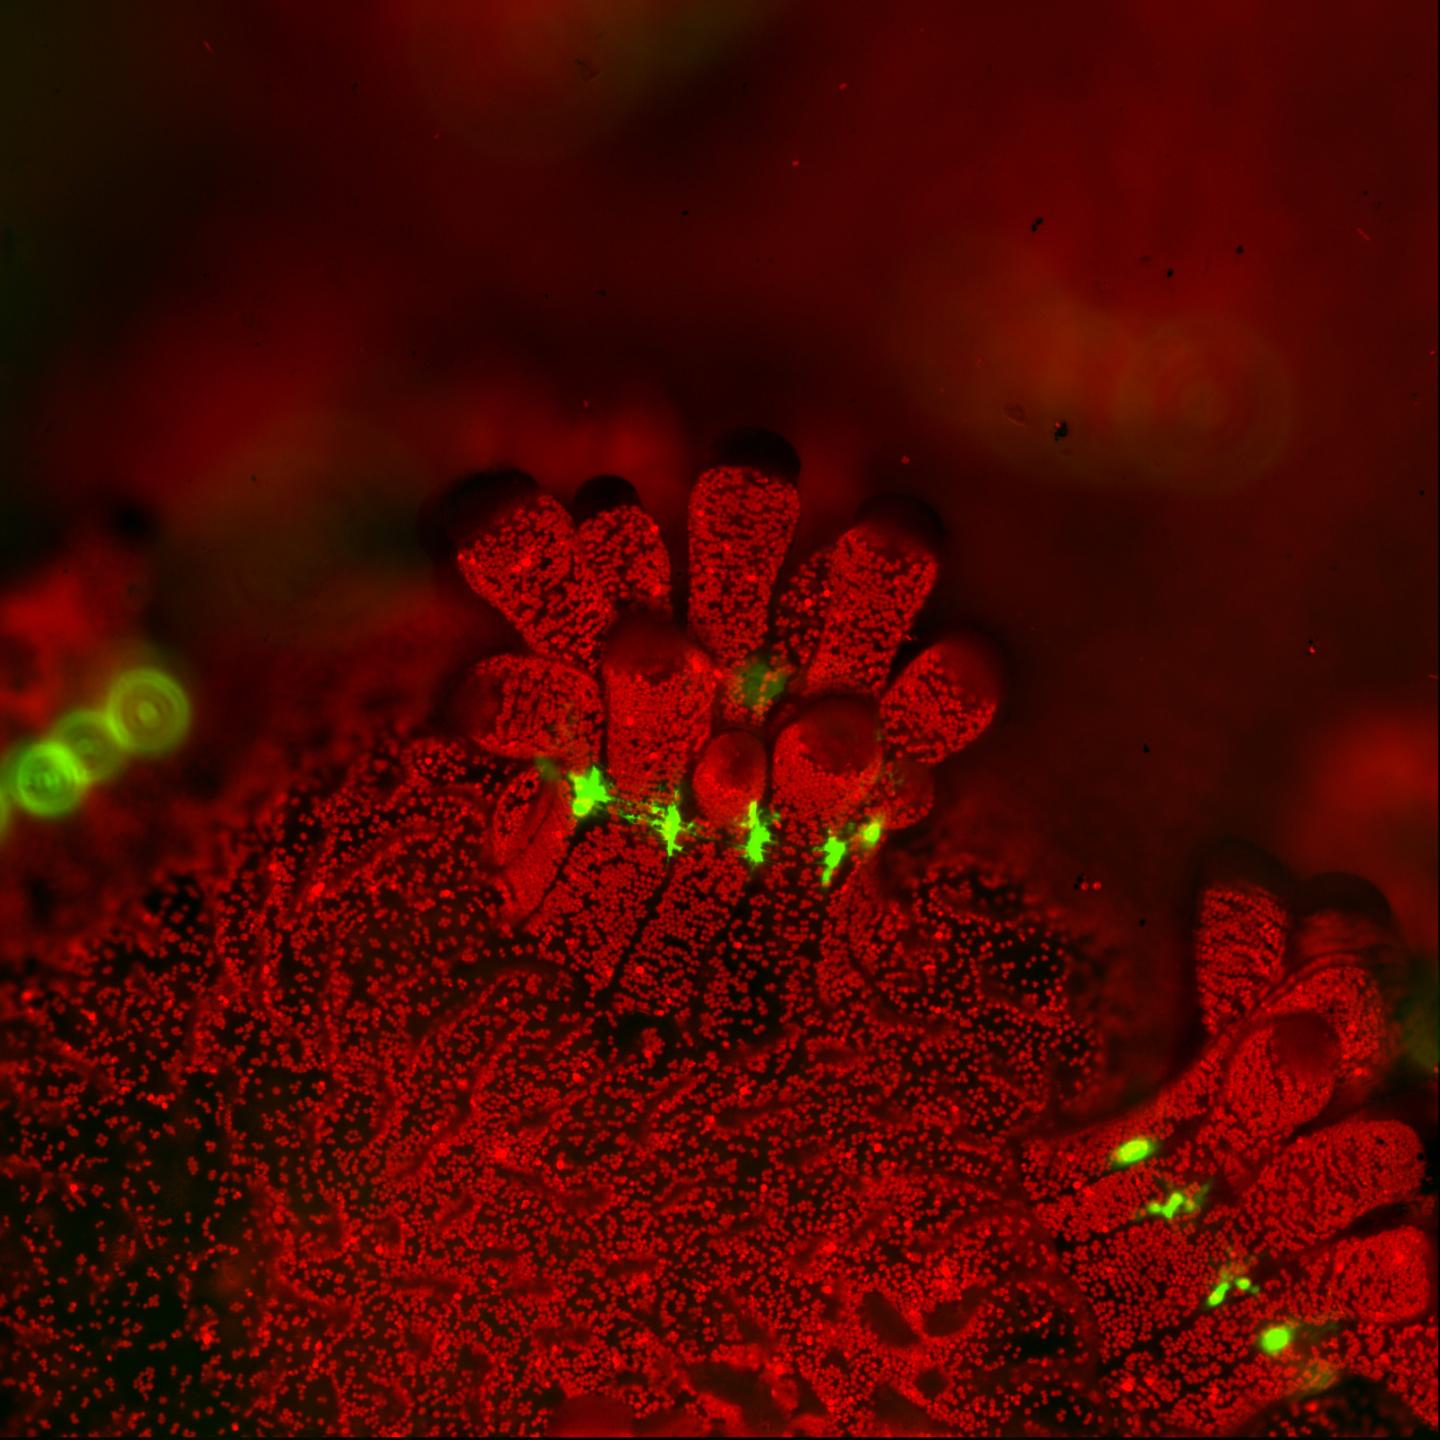 Fluorescent close-up of polyp